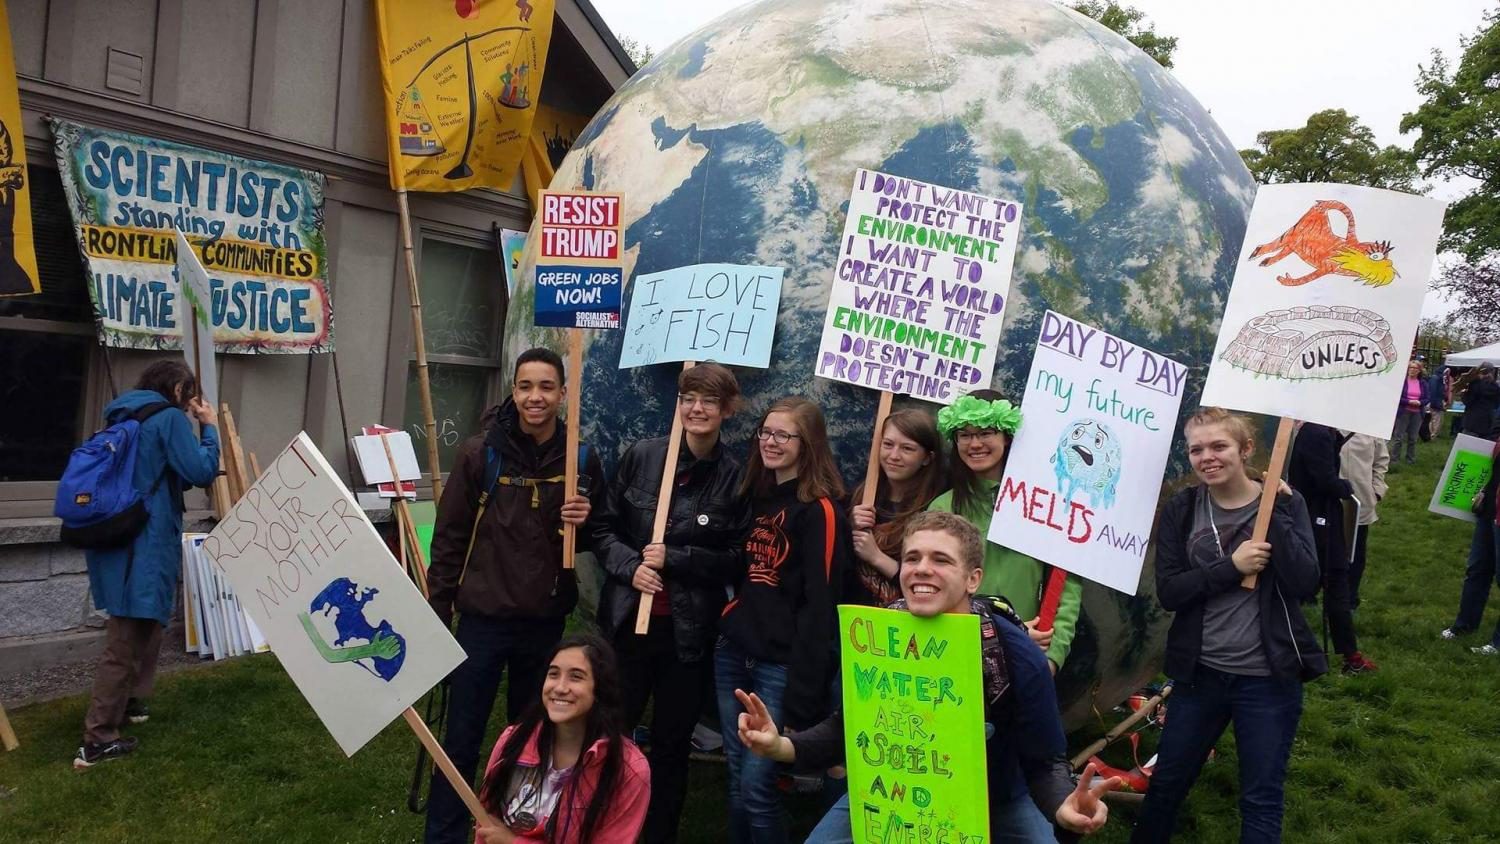 Cougs march for science.
